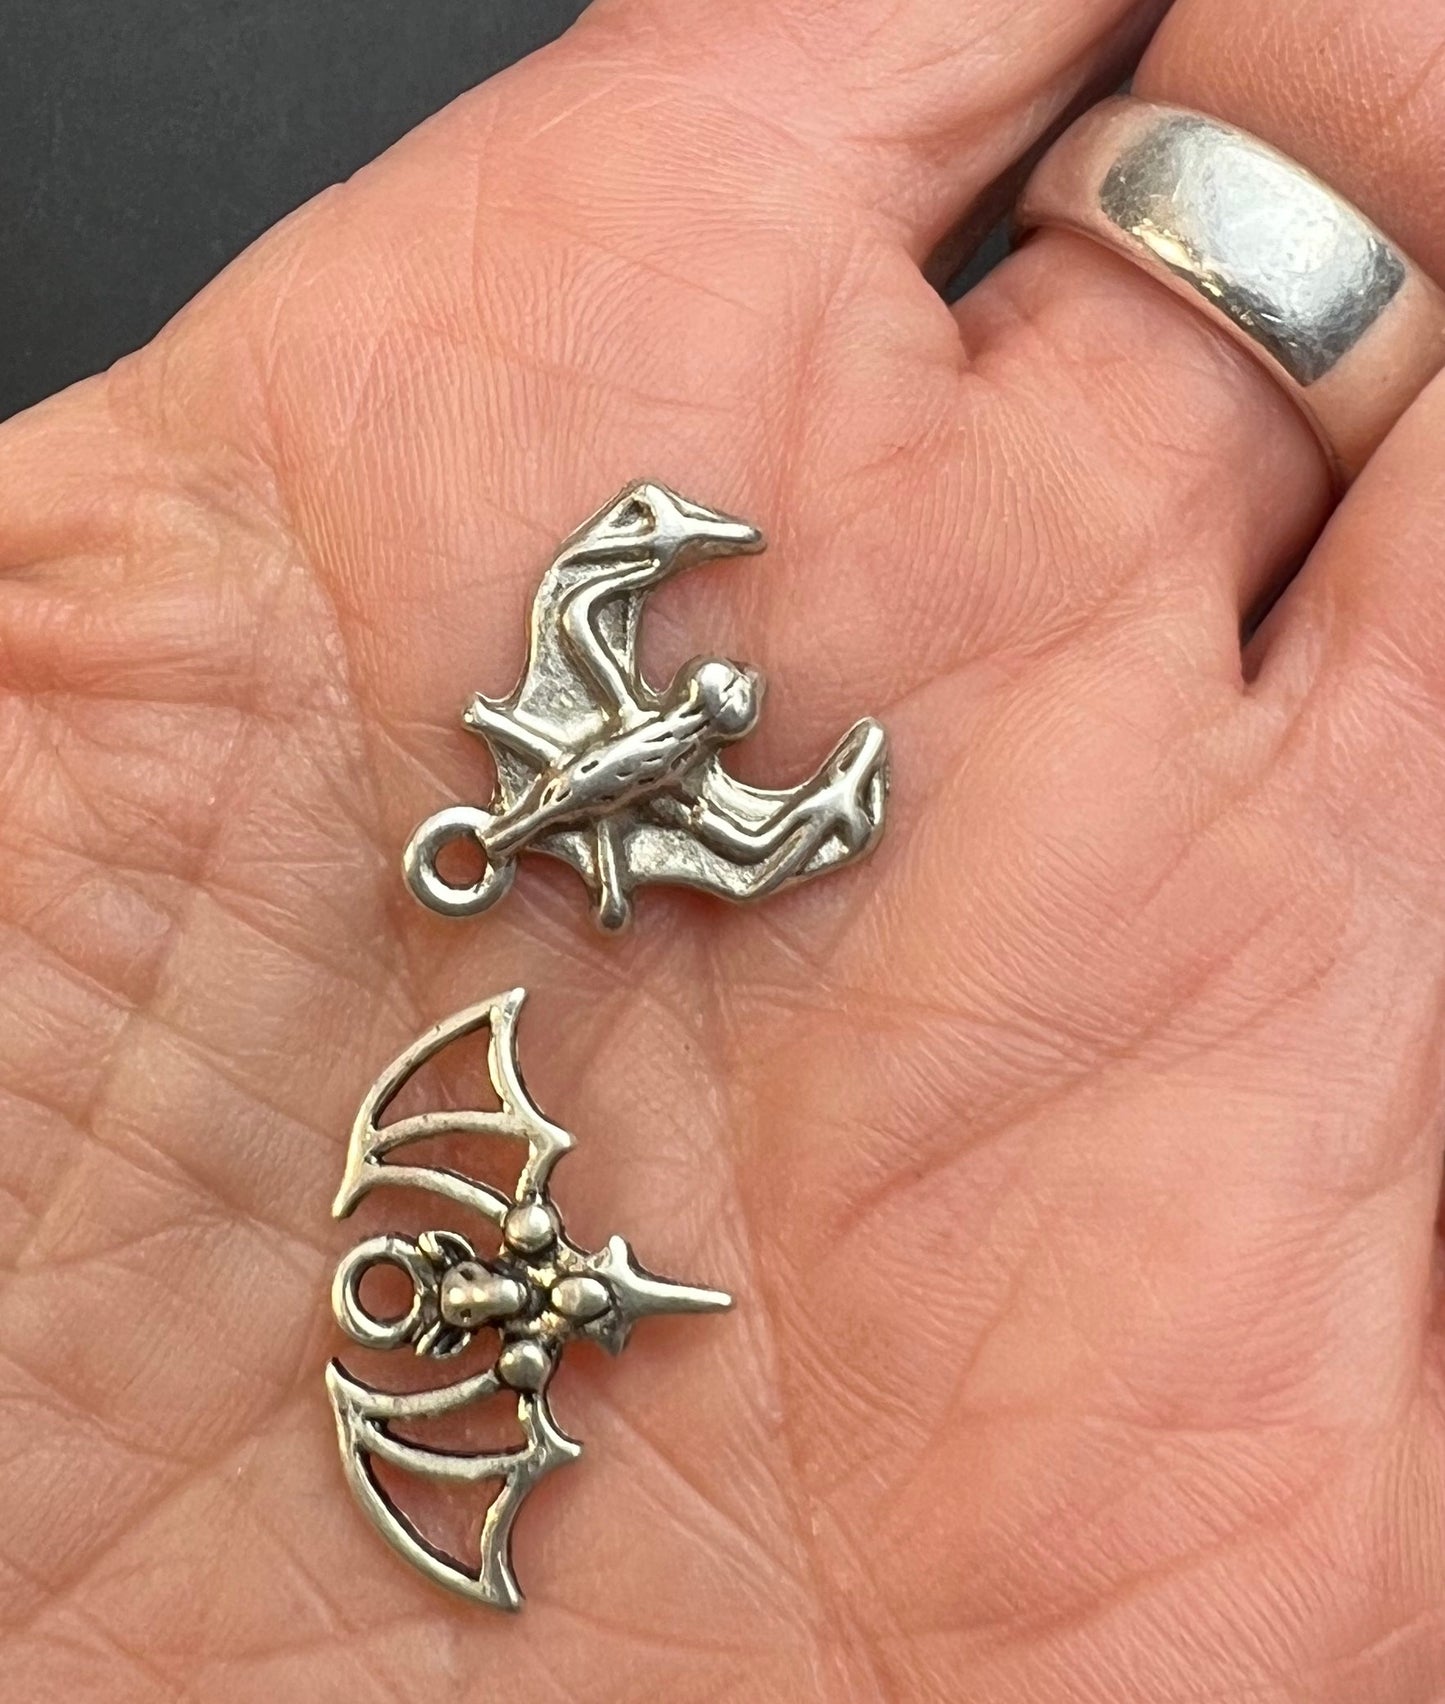 Pair of Little Bat Charms